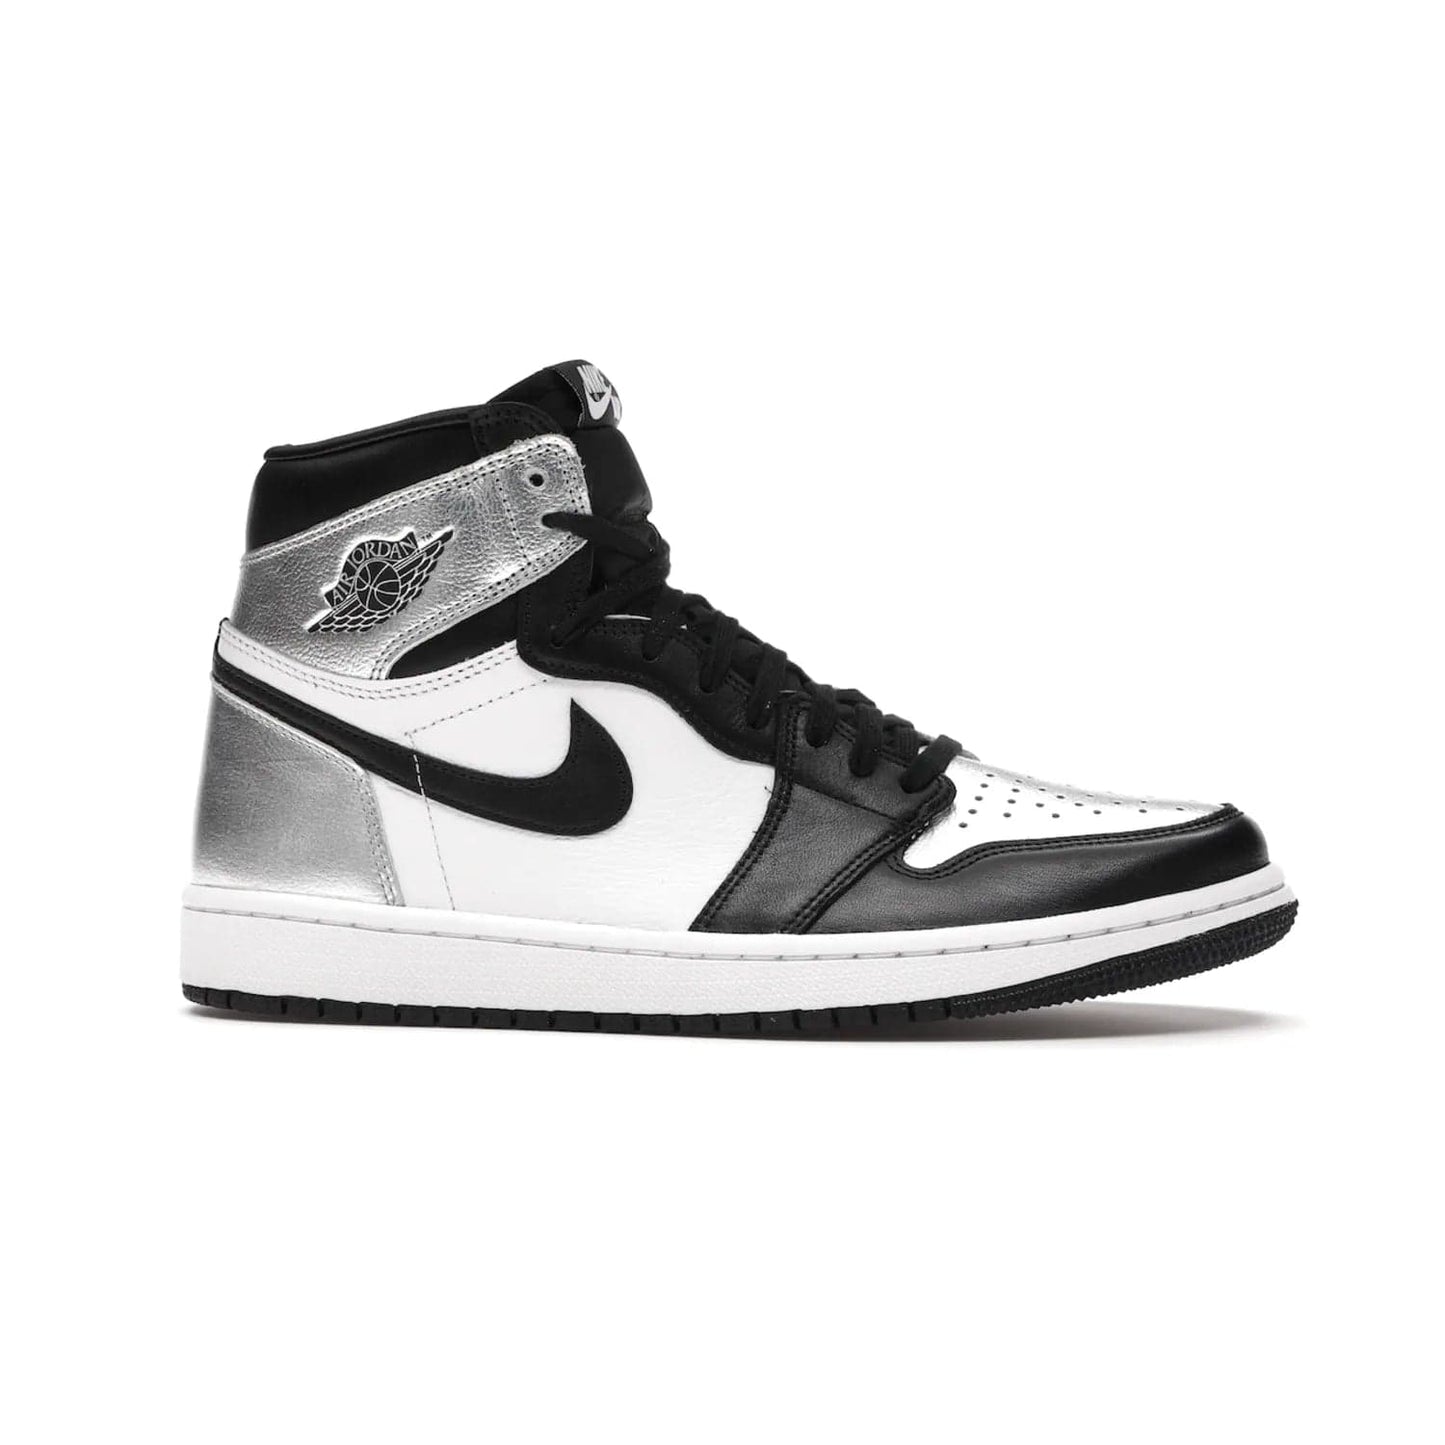 Jordan 1 Retro High Silver Toe (Women's) - Image 2 - Only at www.BallersClubKickz.com - Introducing the Jordan 1 Retro High Silver Toe (Women's): an updated spin on the iconic 'Black Toe' theme. Featuring white & black leather and silver patent leather construction. Nike Air branding, Air Jordan Wings logo, and white/black sole finish give a classic look. The perfect addition to an on-trend streetwear look. Available in classic black & white, this Jordan 1 is an instant classic. Released in February 202